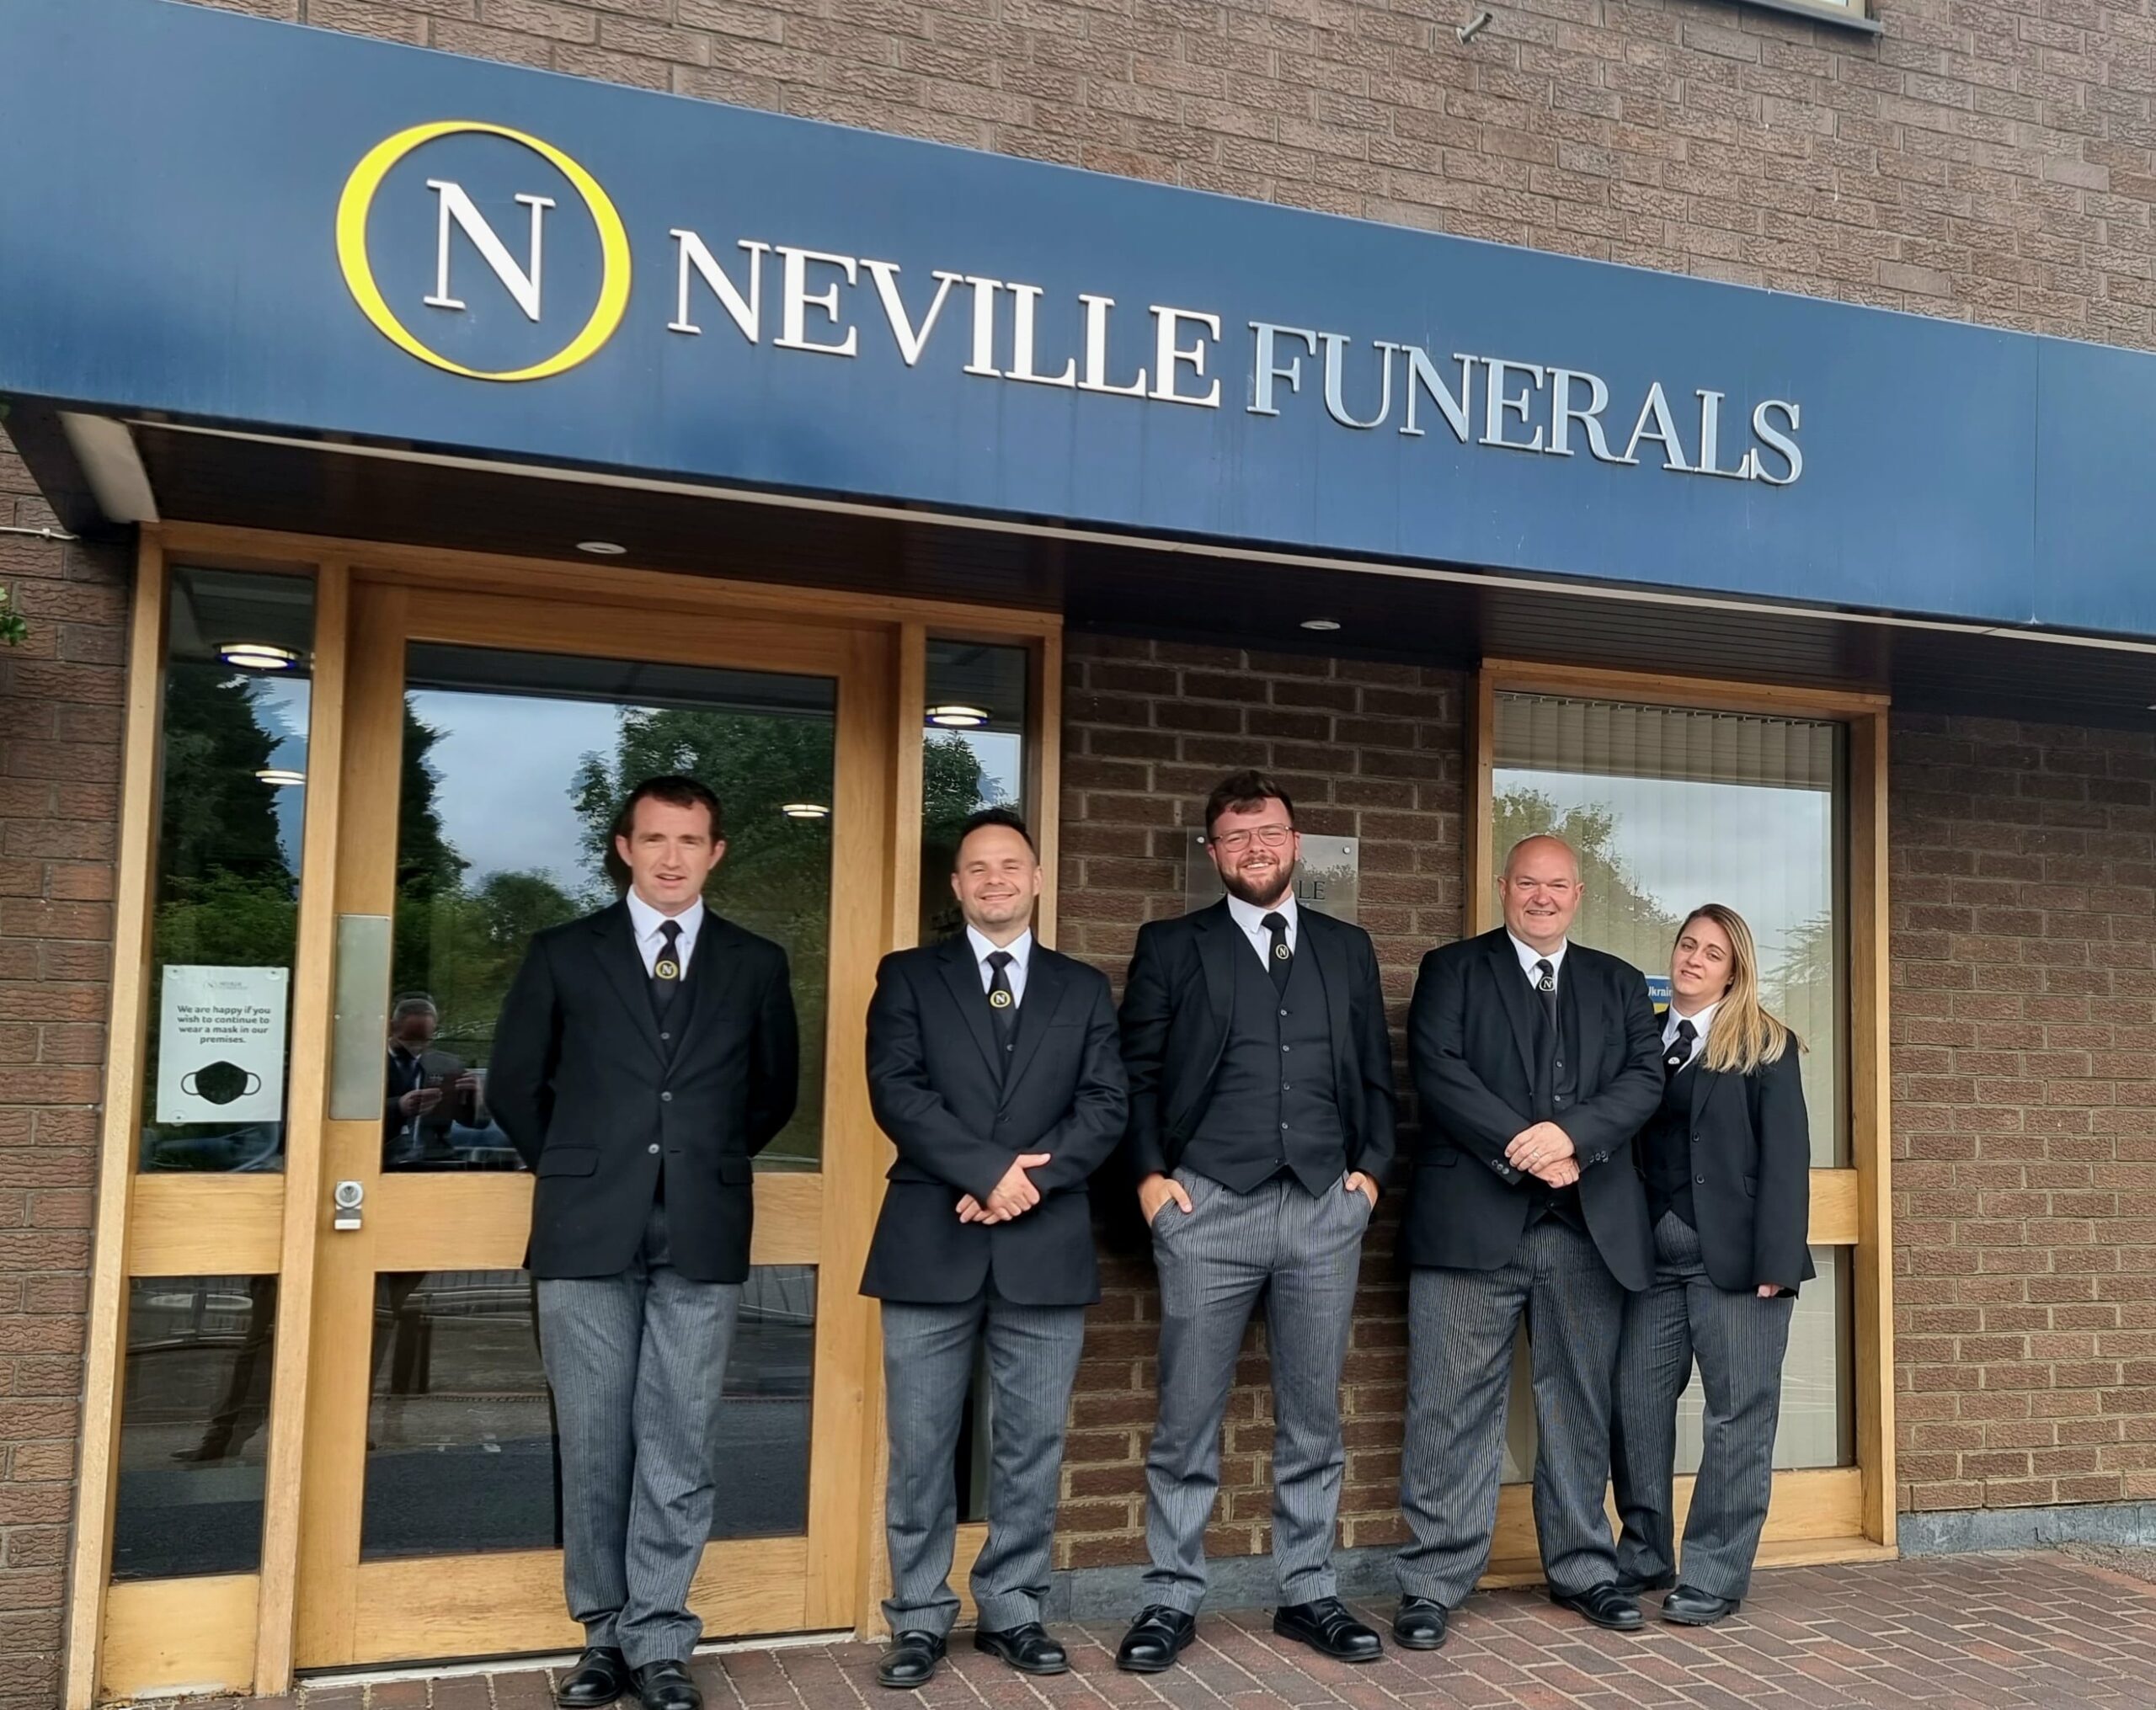 Neville Funerals Introduces New Professional Standards